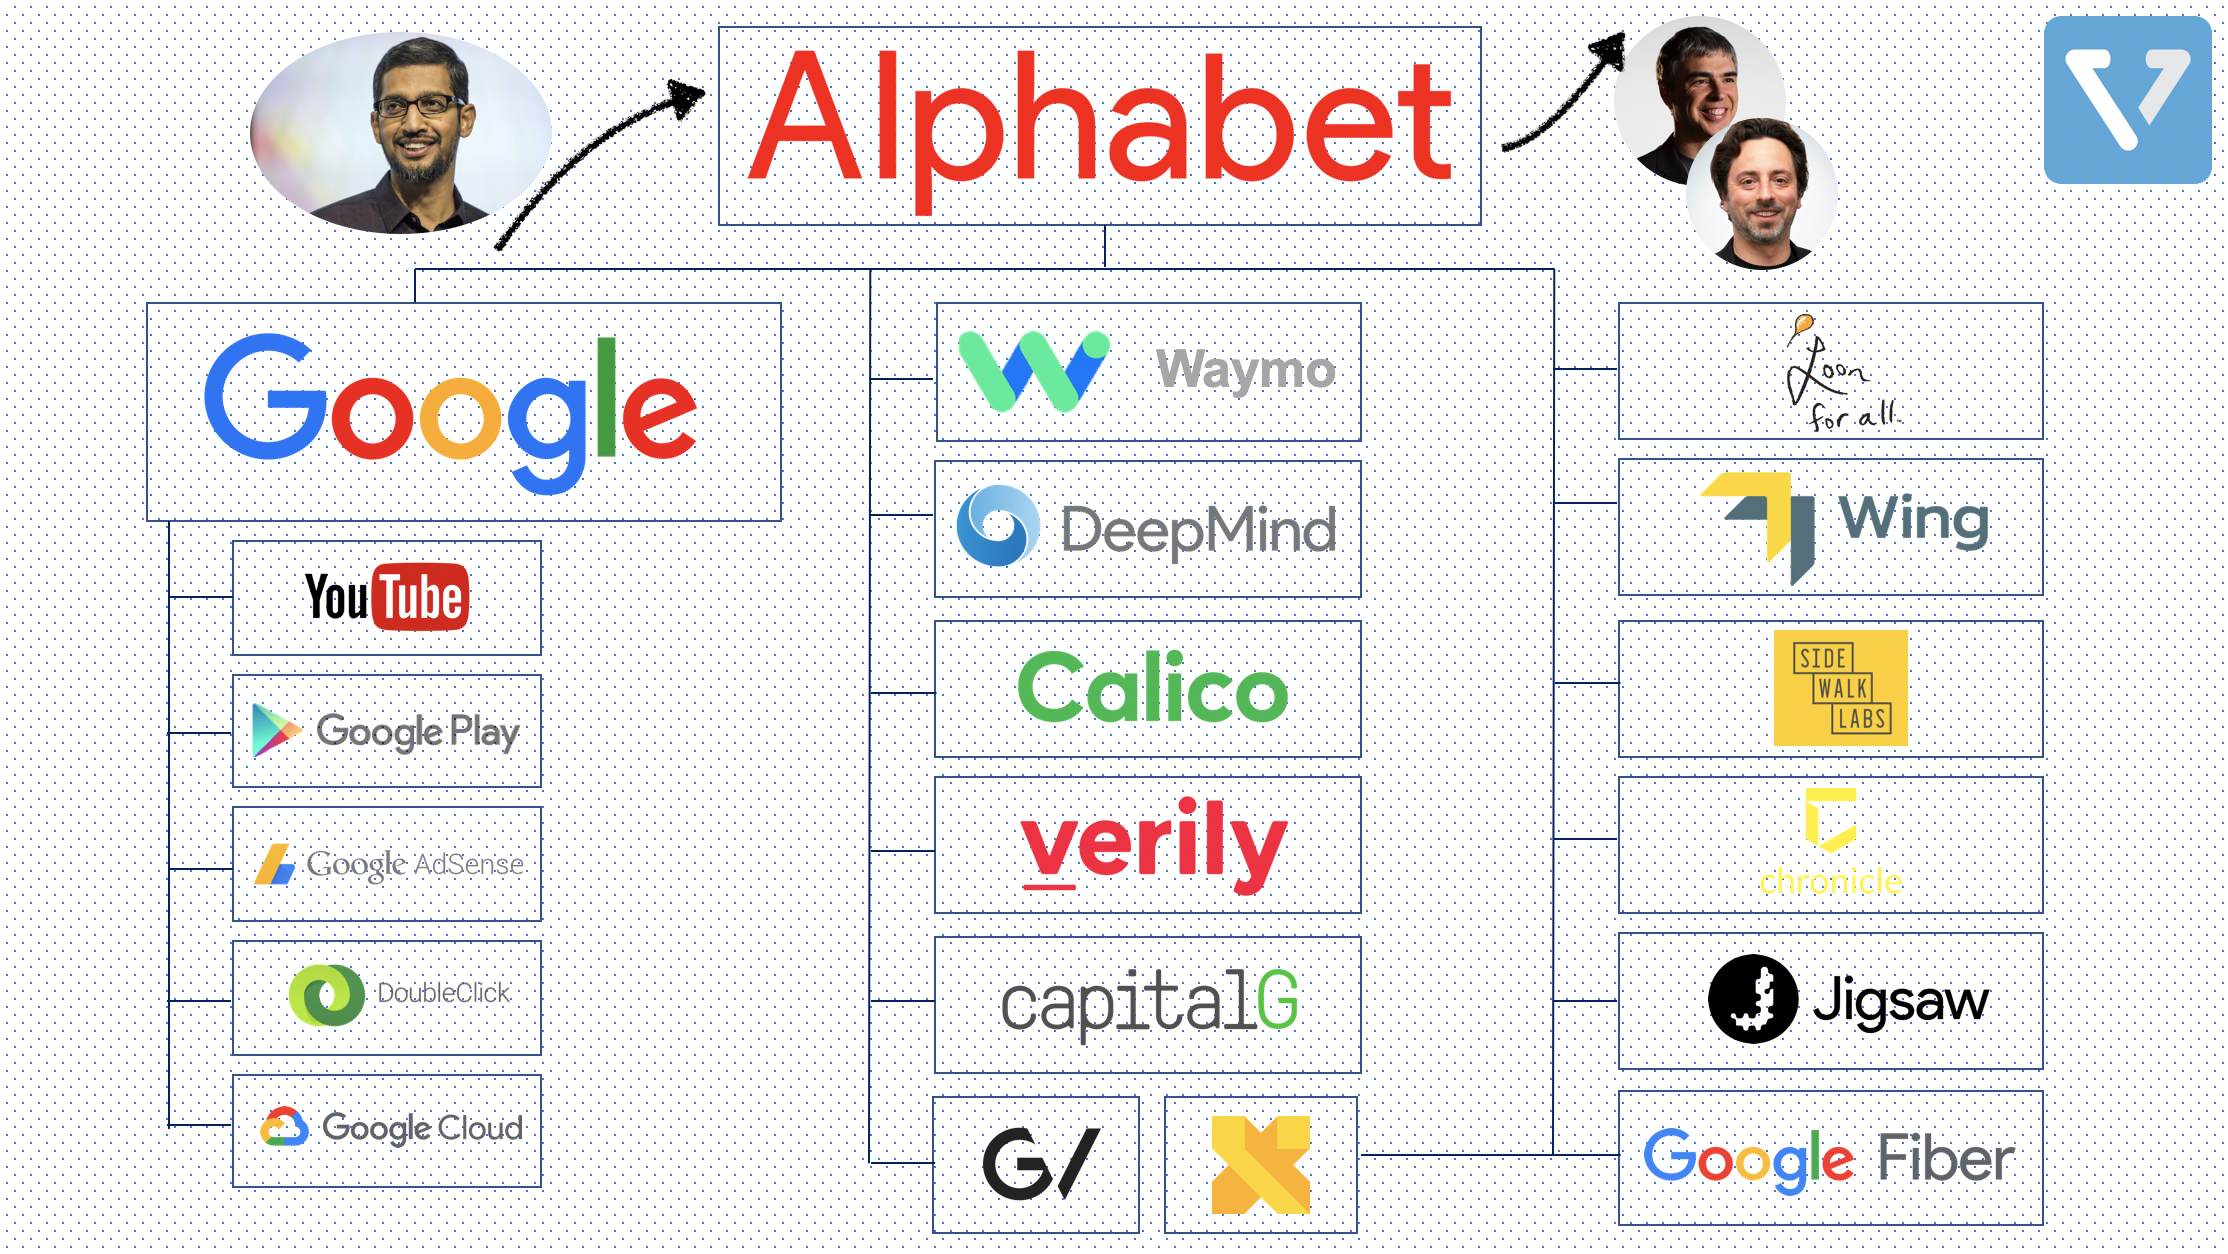 Corporate structure of Alphabet, which comprised of Google and its other bets. It being led by the CEO Sundar Pichai, while Sergey Brin and Larry Page stepped down from day to da operations.